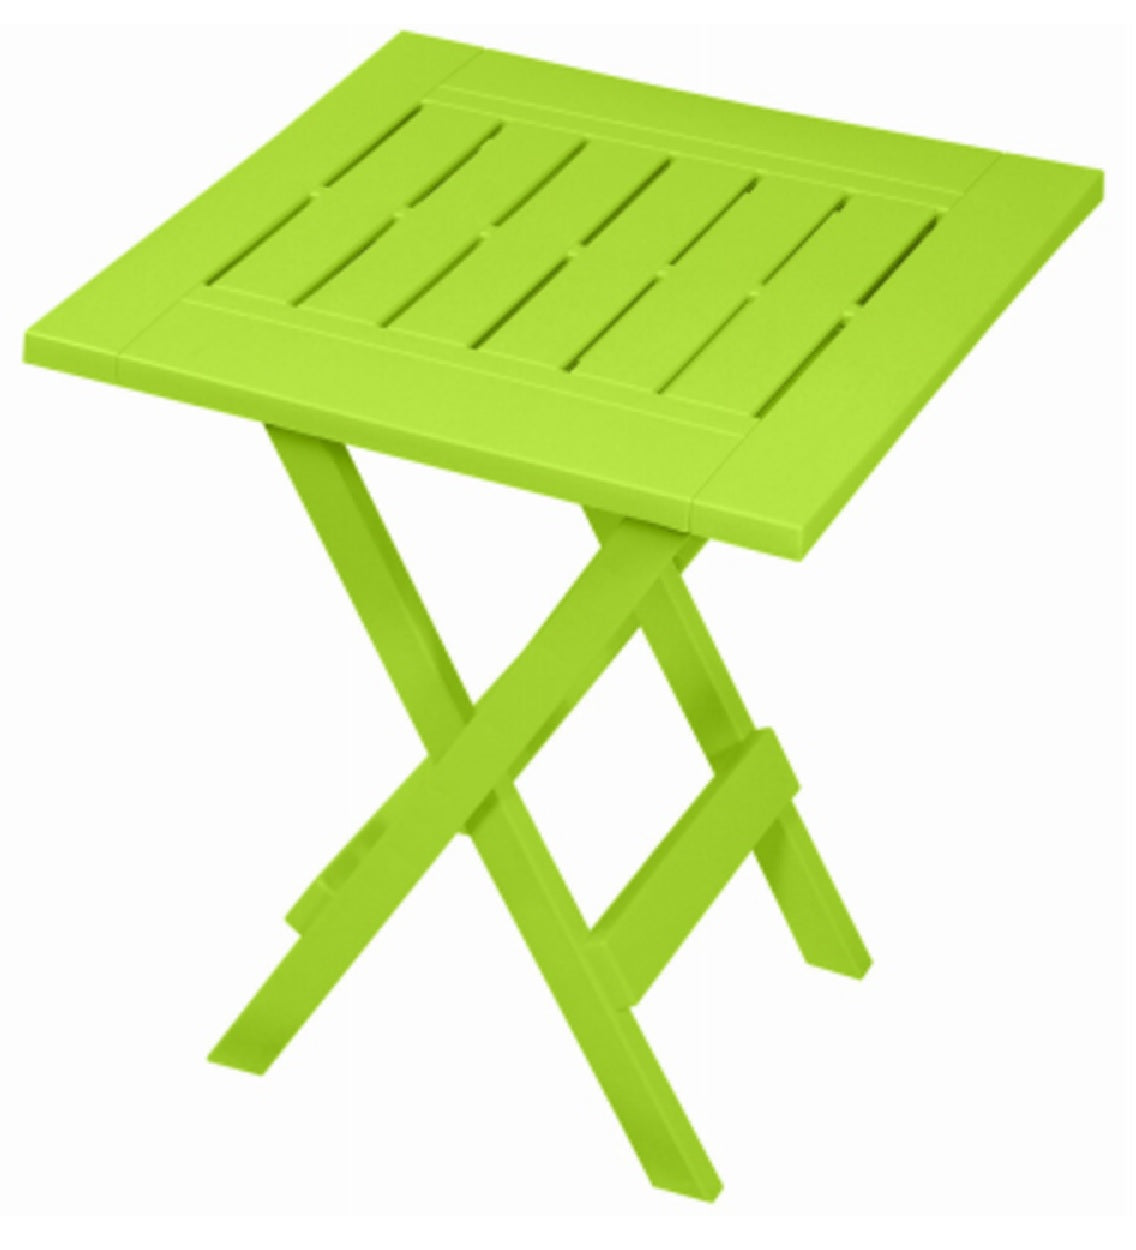 Gracious Living 14216-6PDQ Foldable Side Table, Green